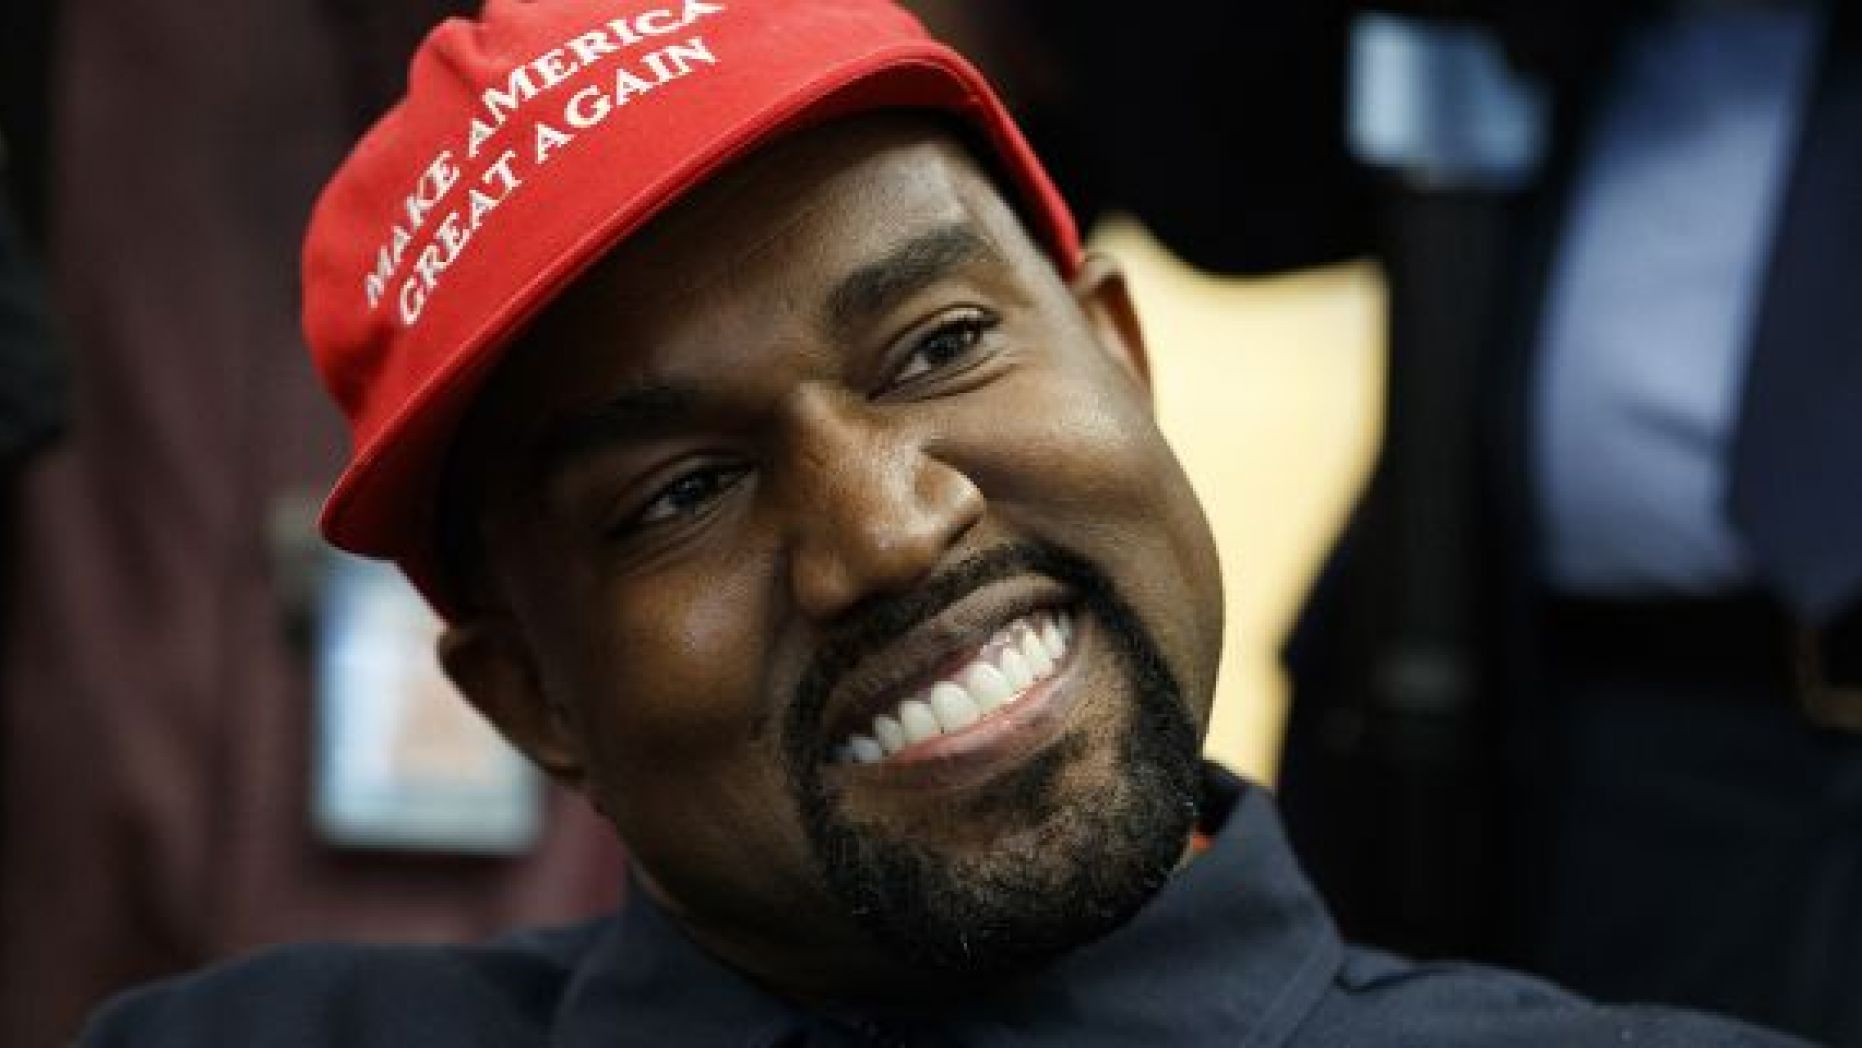 Rapper Kanye West smiles as he listens to a question from a reporter during a meeting in the Oval Office of the White House with President Donald Trump.